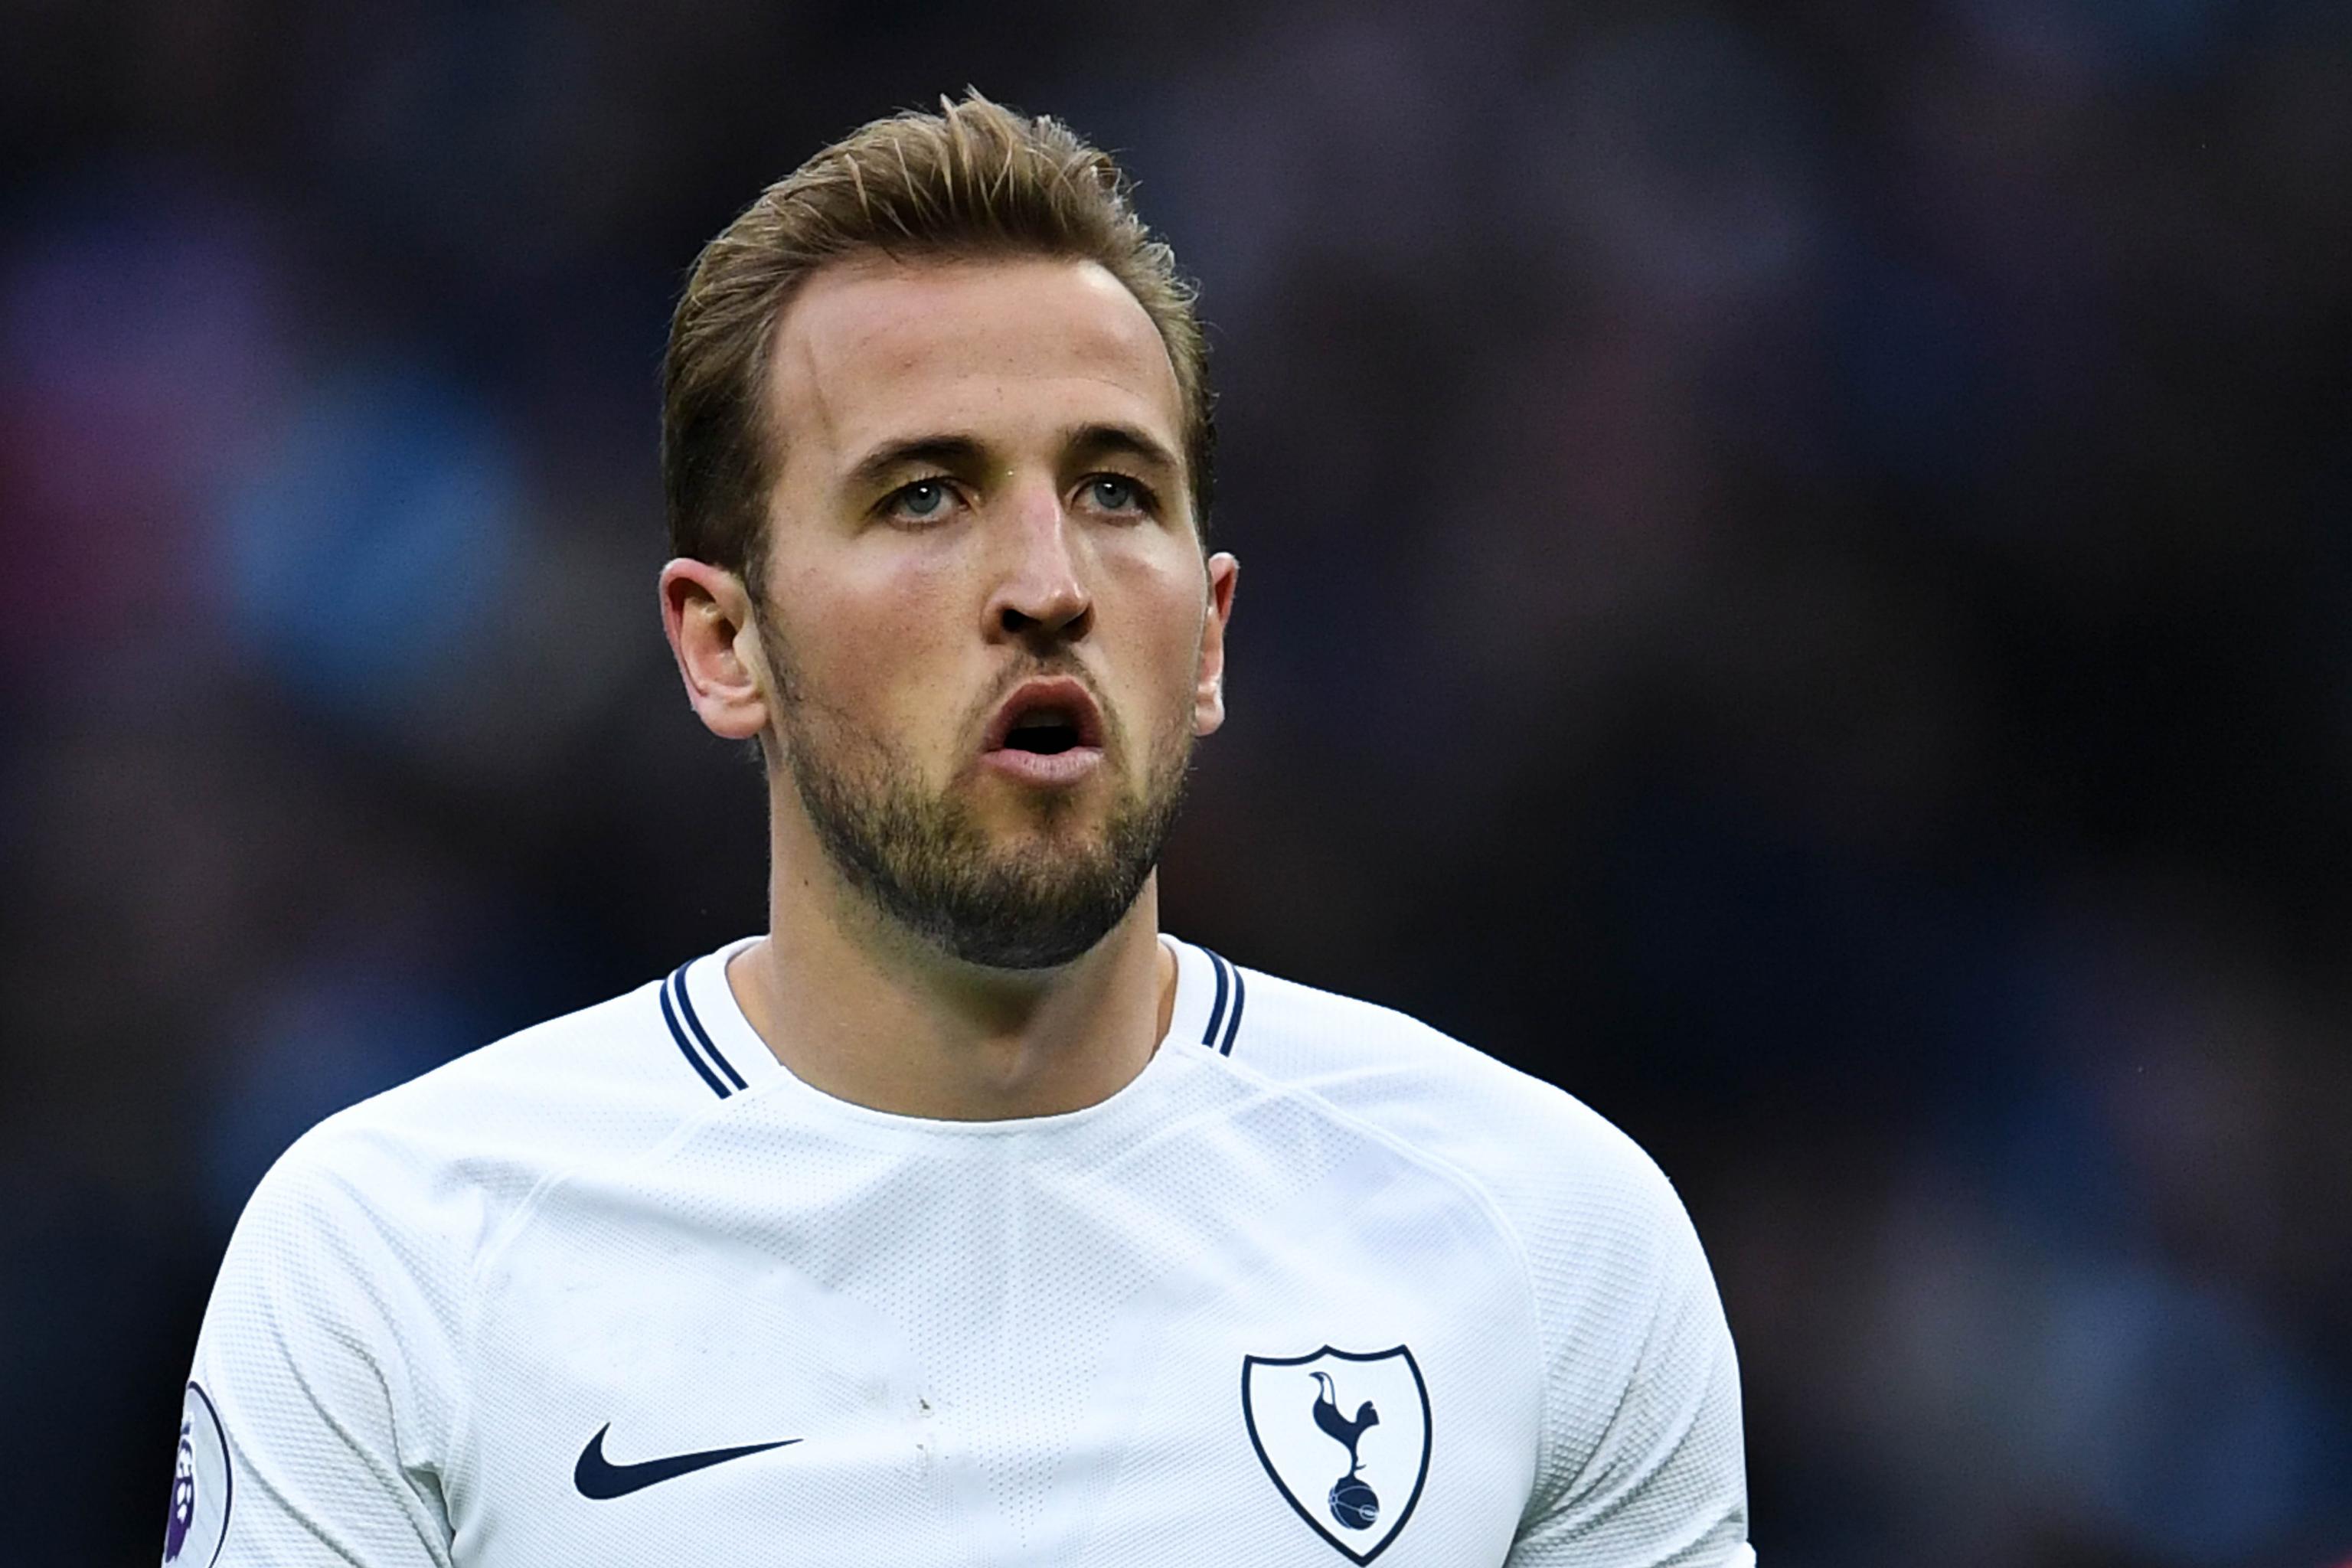 Harry Kane to miss Manchester United match with hamstring strain